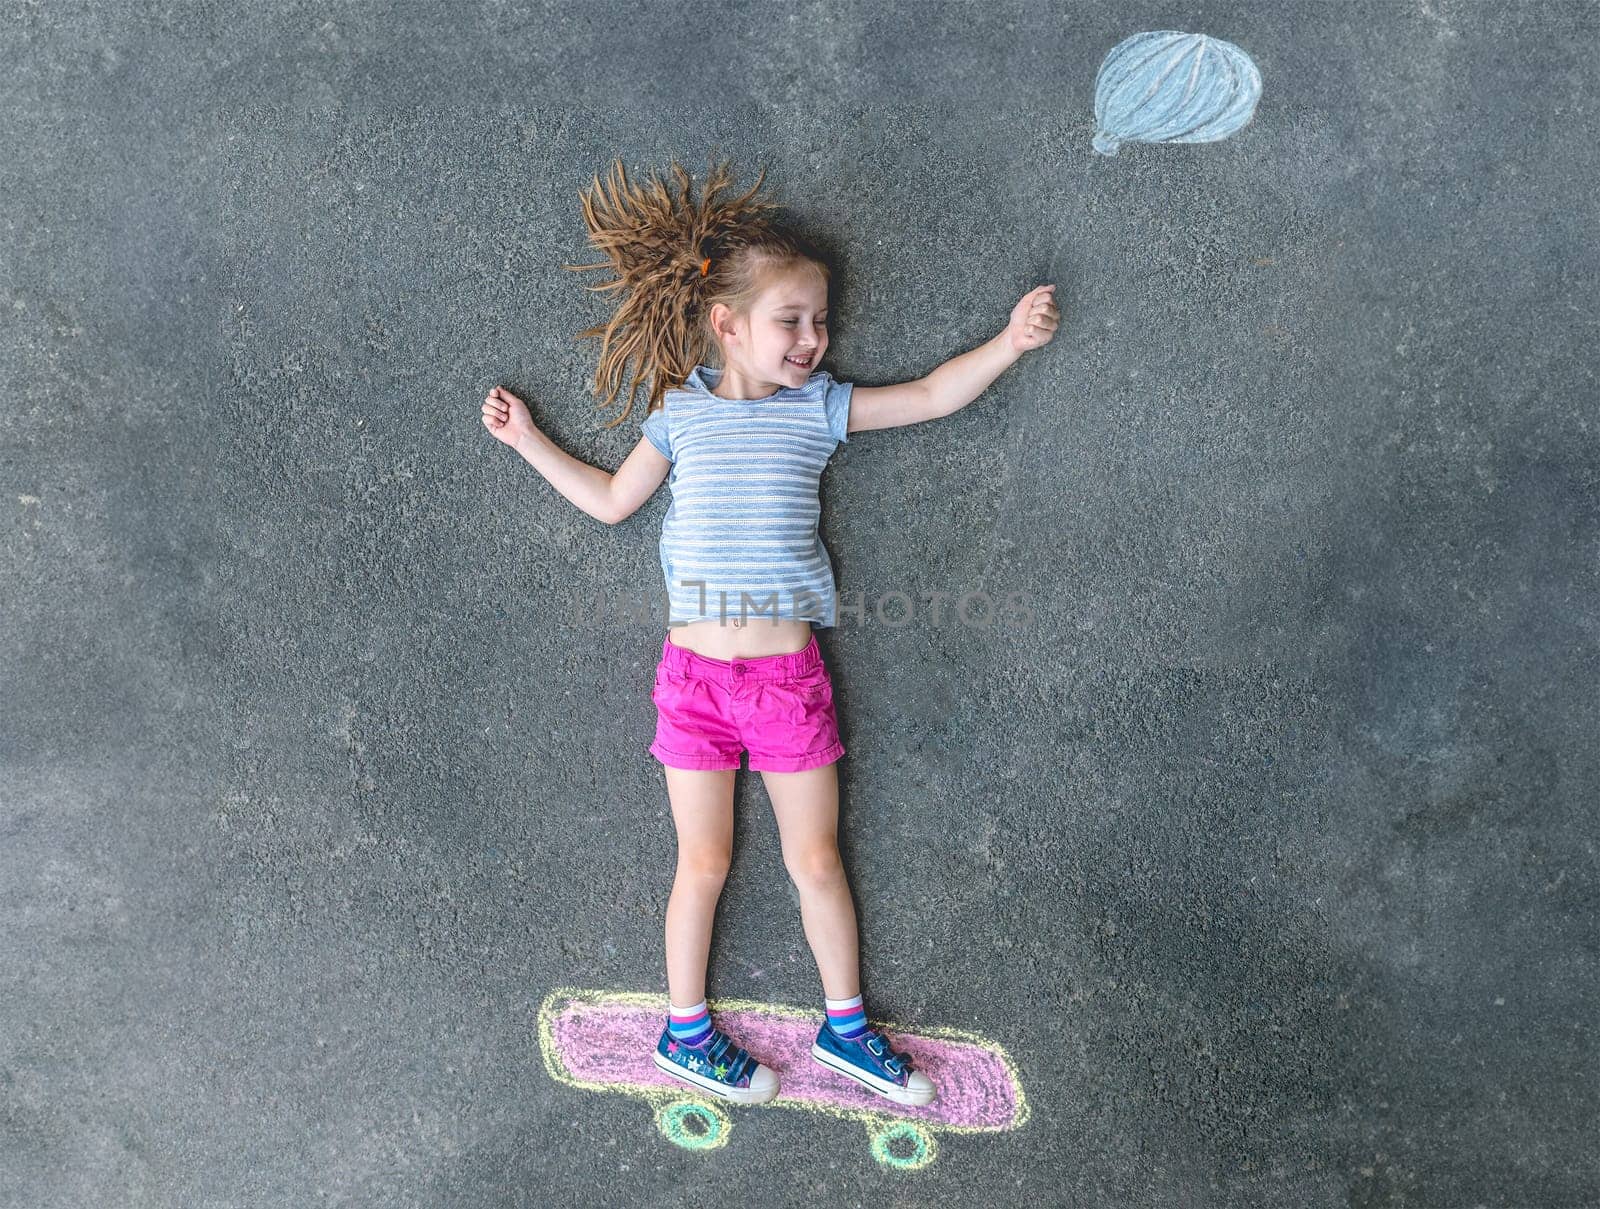 cute little girl on a skateboard drawn in chalk on the pavement. view from above